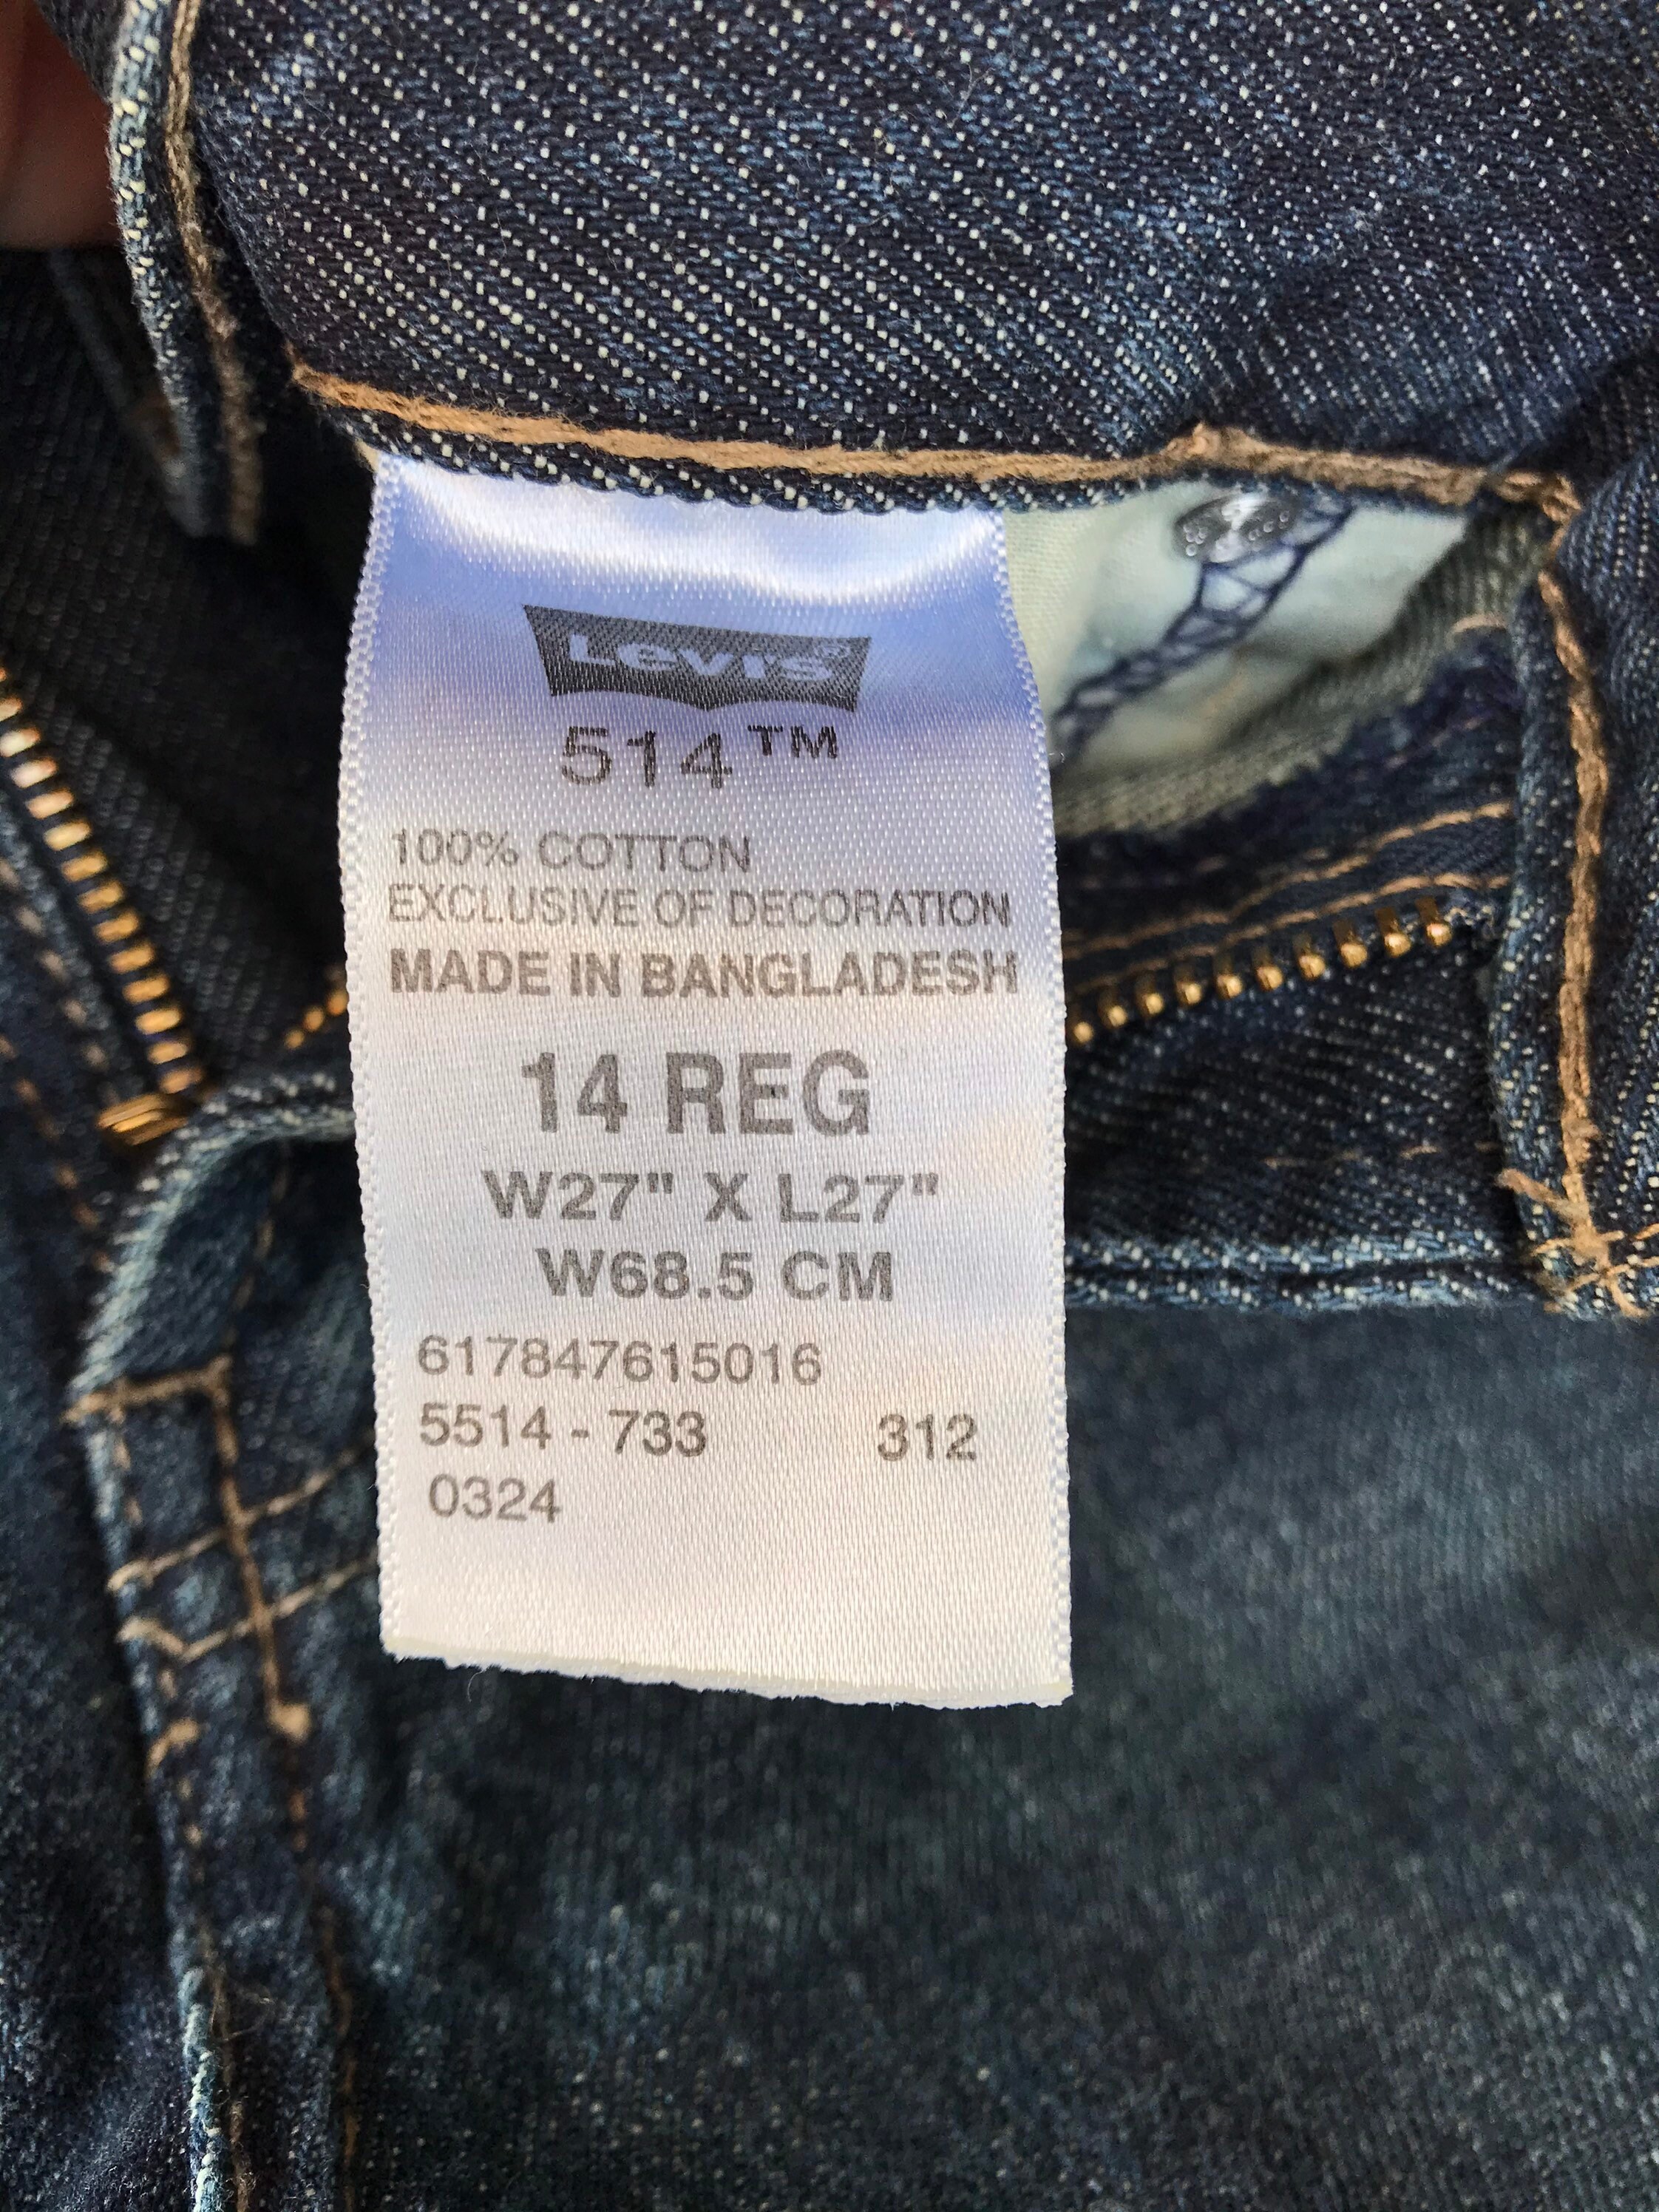 Levis 514 Jeans 27 Size Small Dark Wash Straight 00s - Etsy